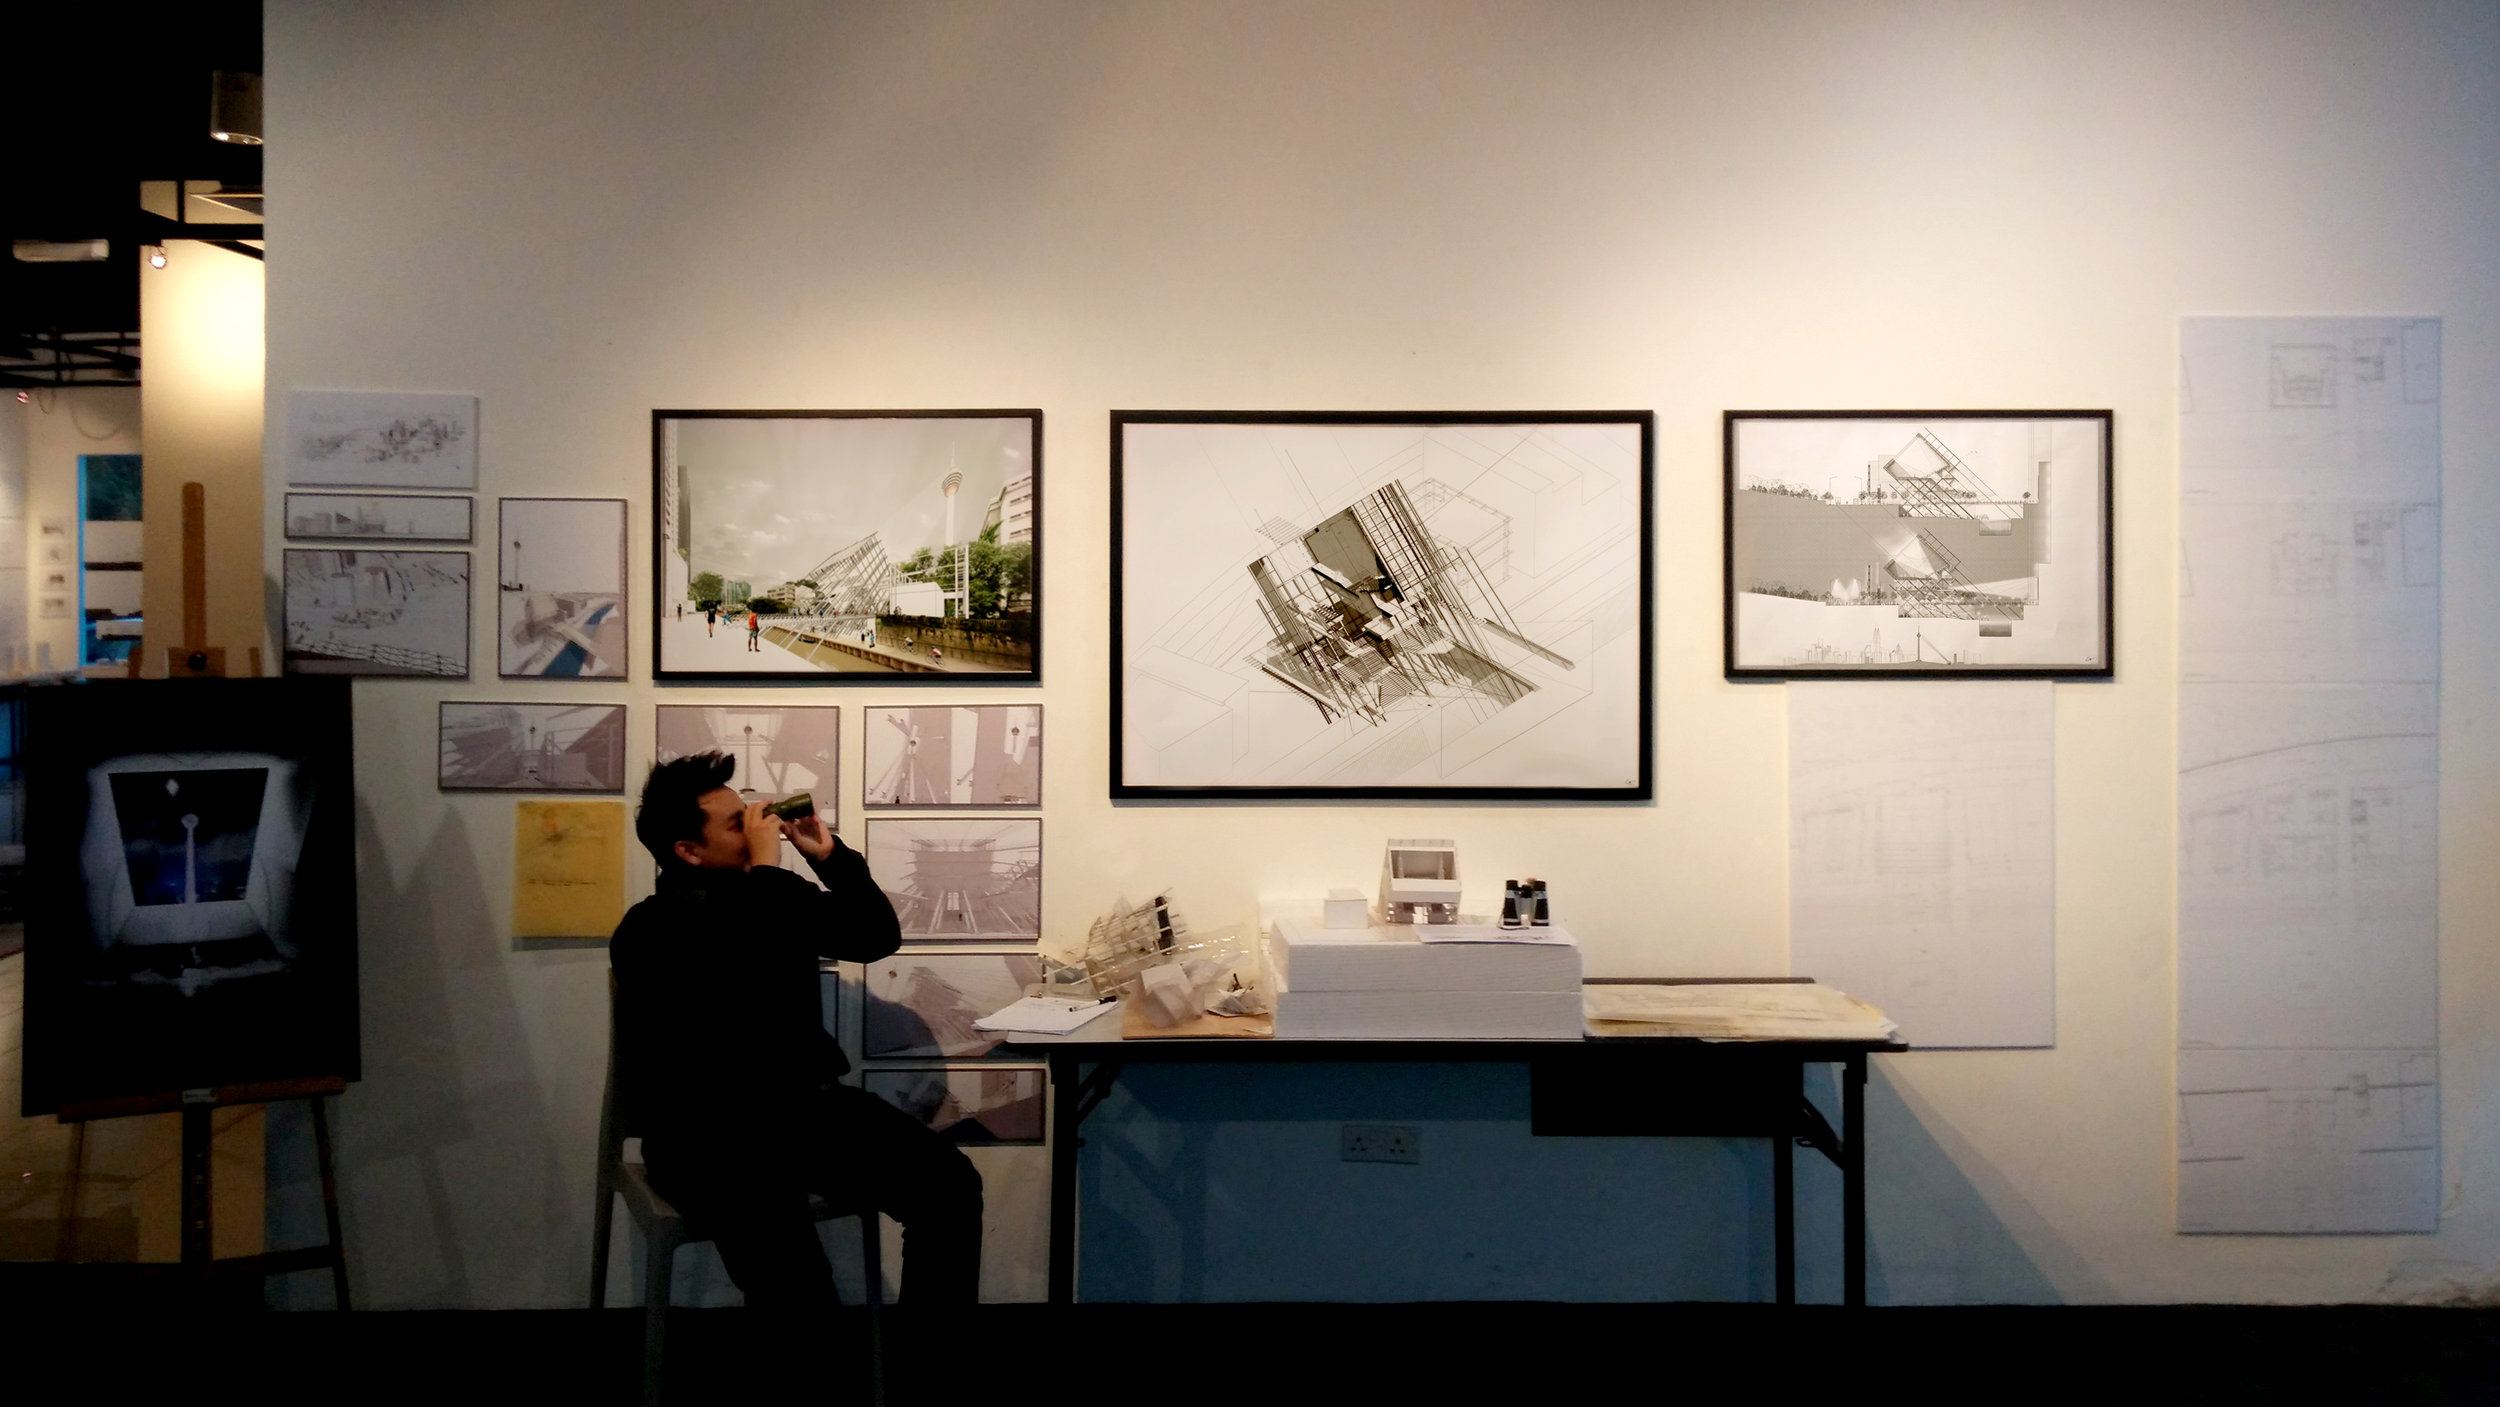  Featuring VPAC in an architecture exhibition in 2015. 